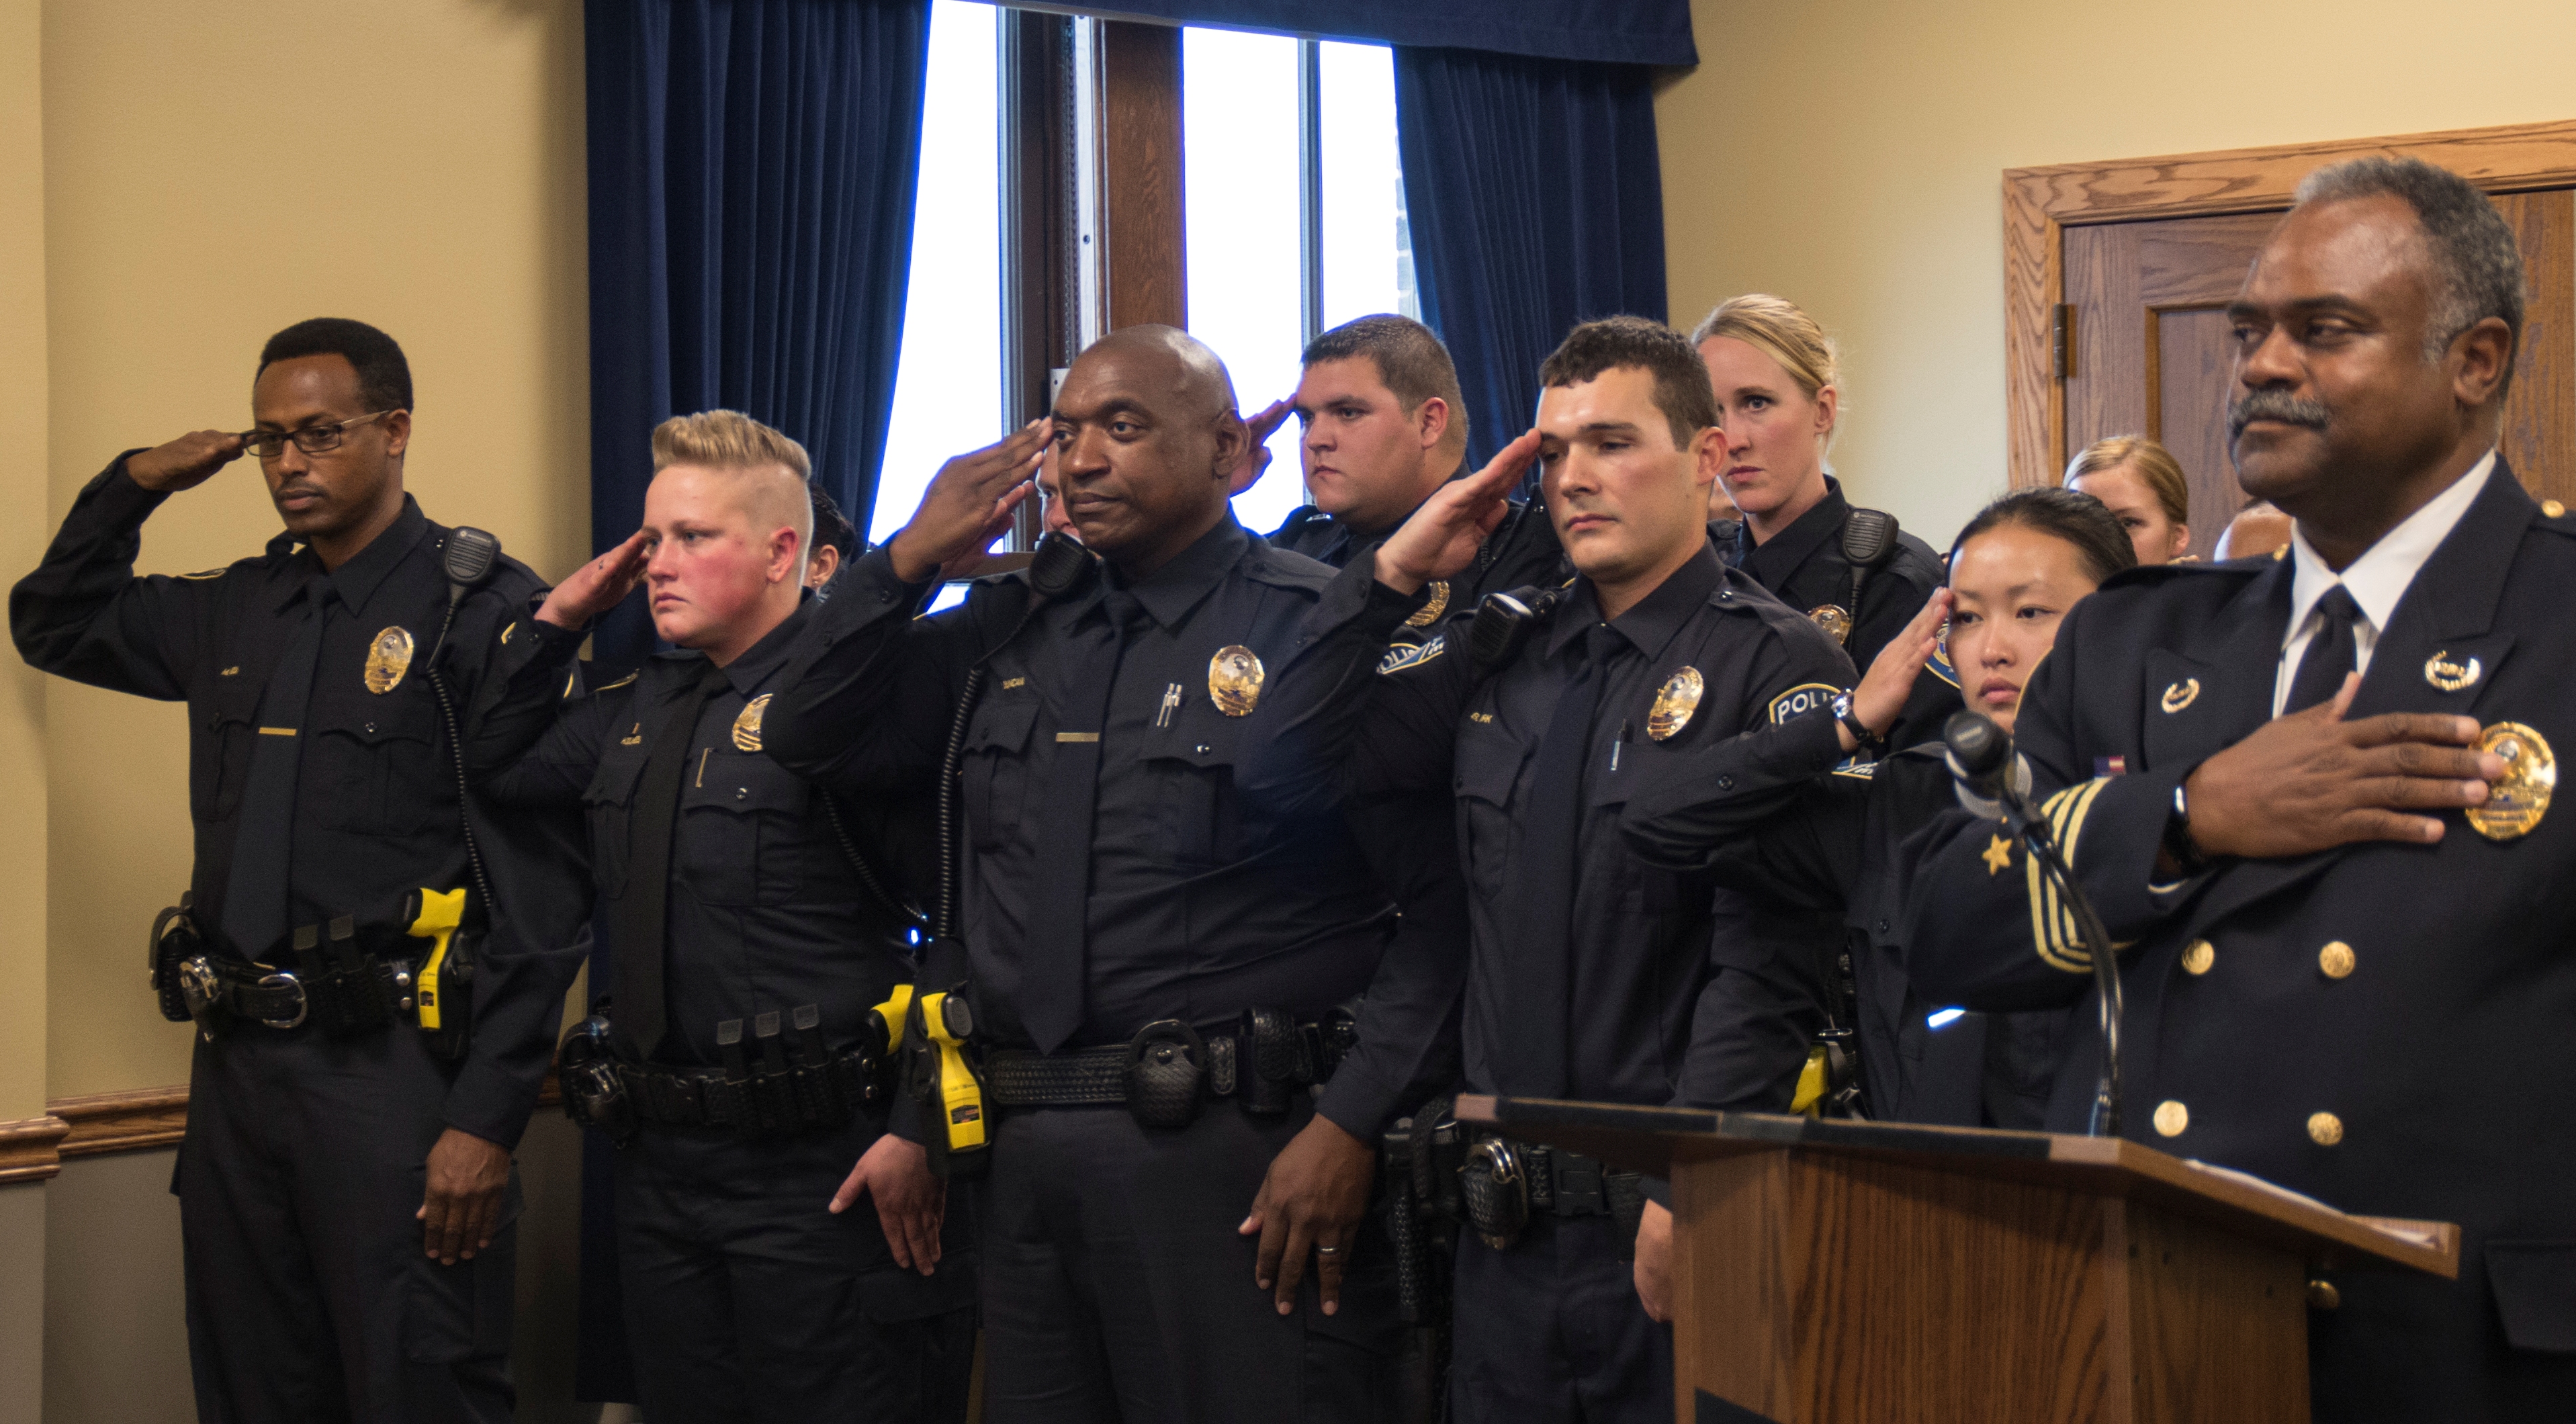 Metro Transit Police Chief John Harrington and officers at a swearing-in ceremony at the Union Depot on Thursday, Nov. 5, 2015.